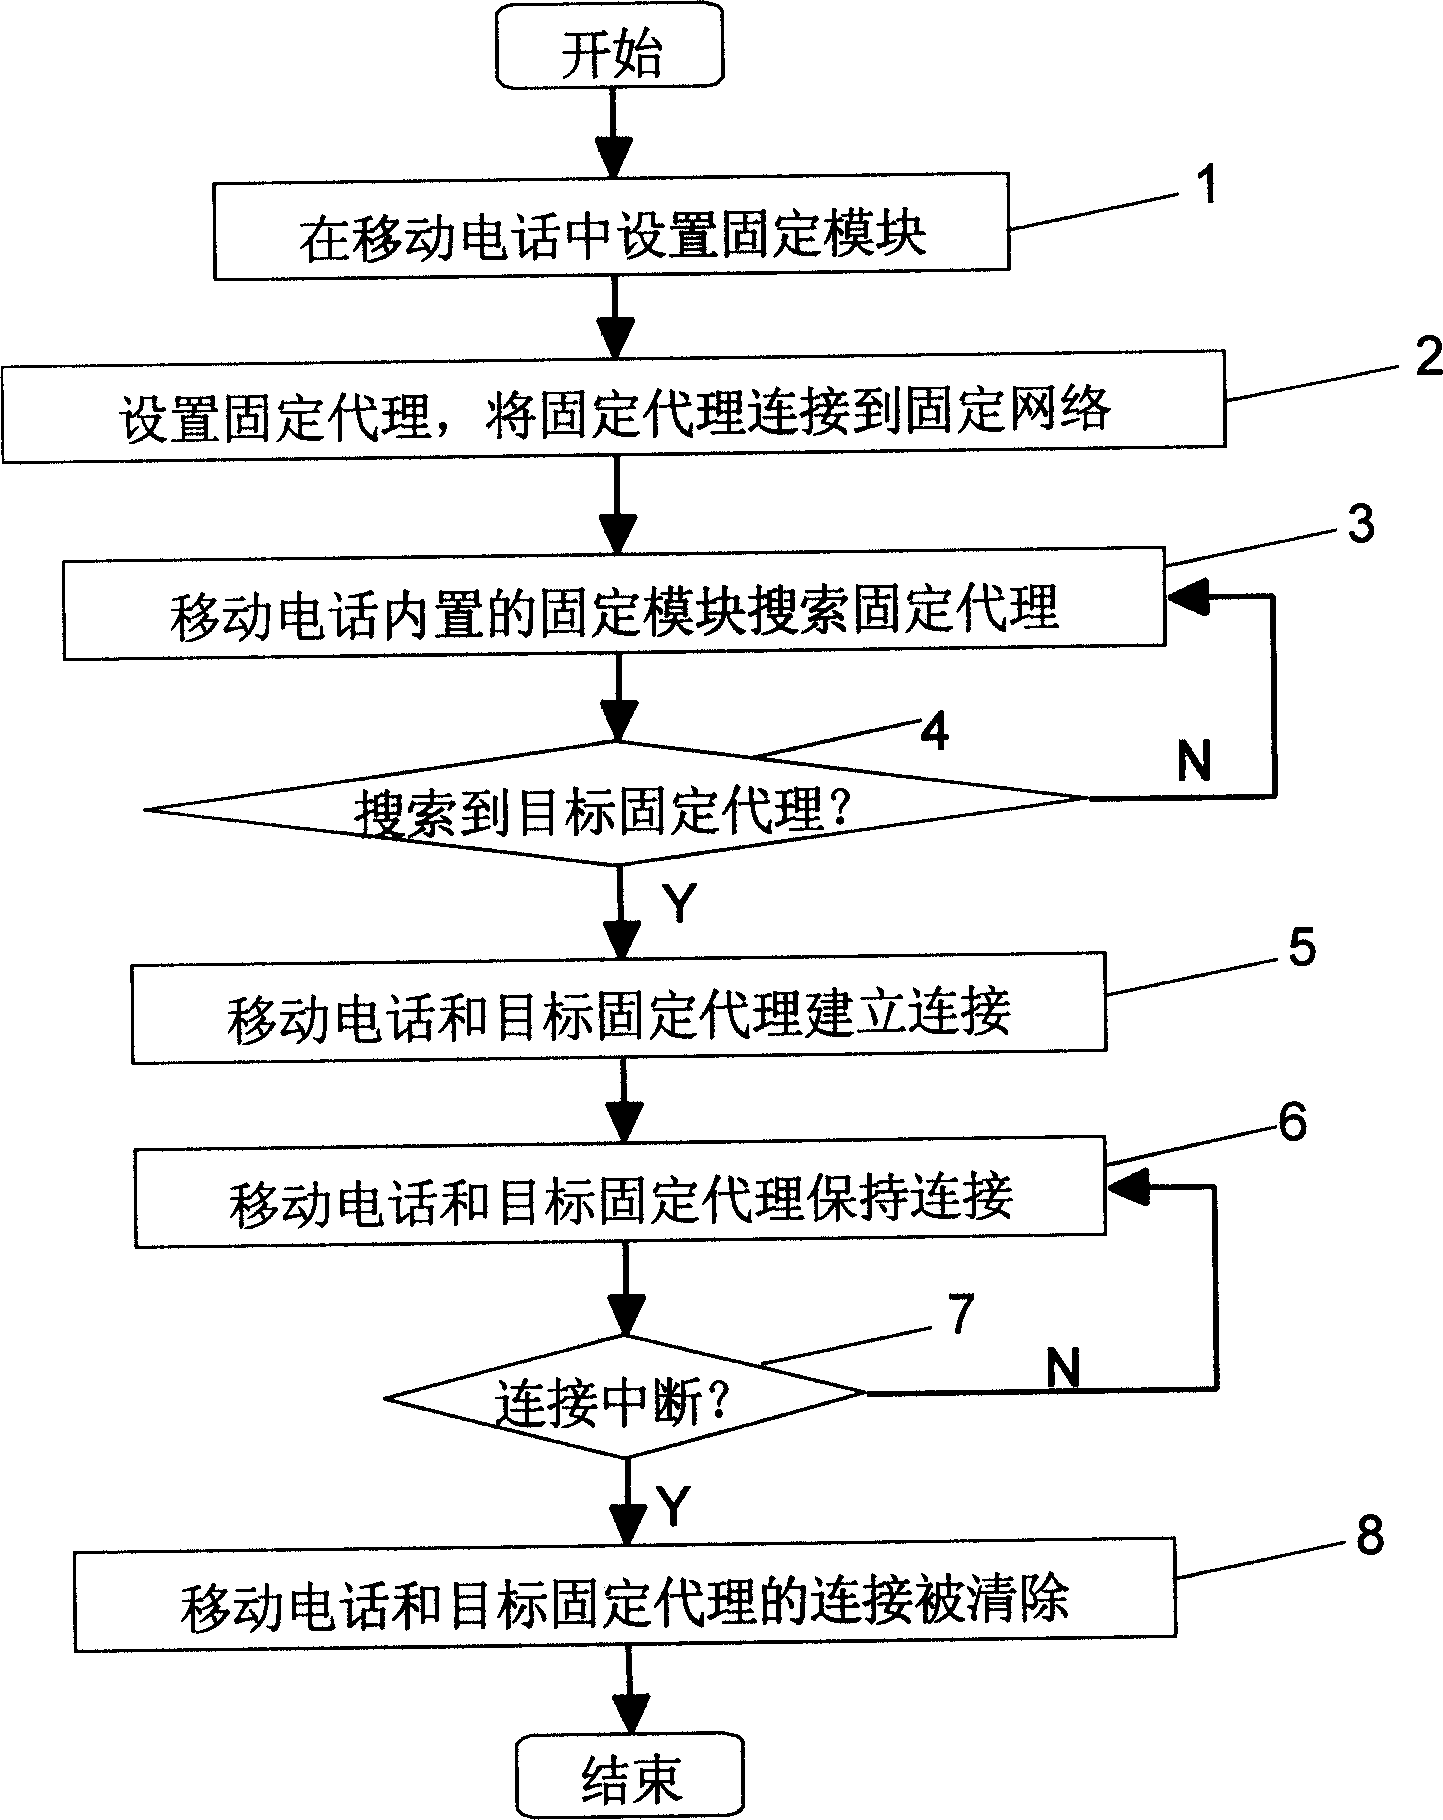 Method for realizing multiple networks operation by use of mobile telephone